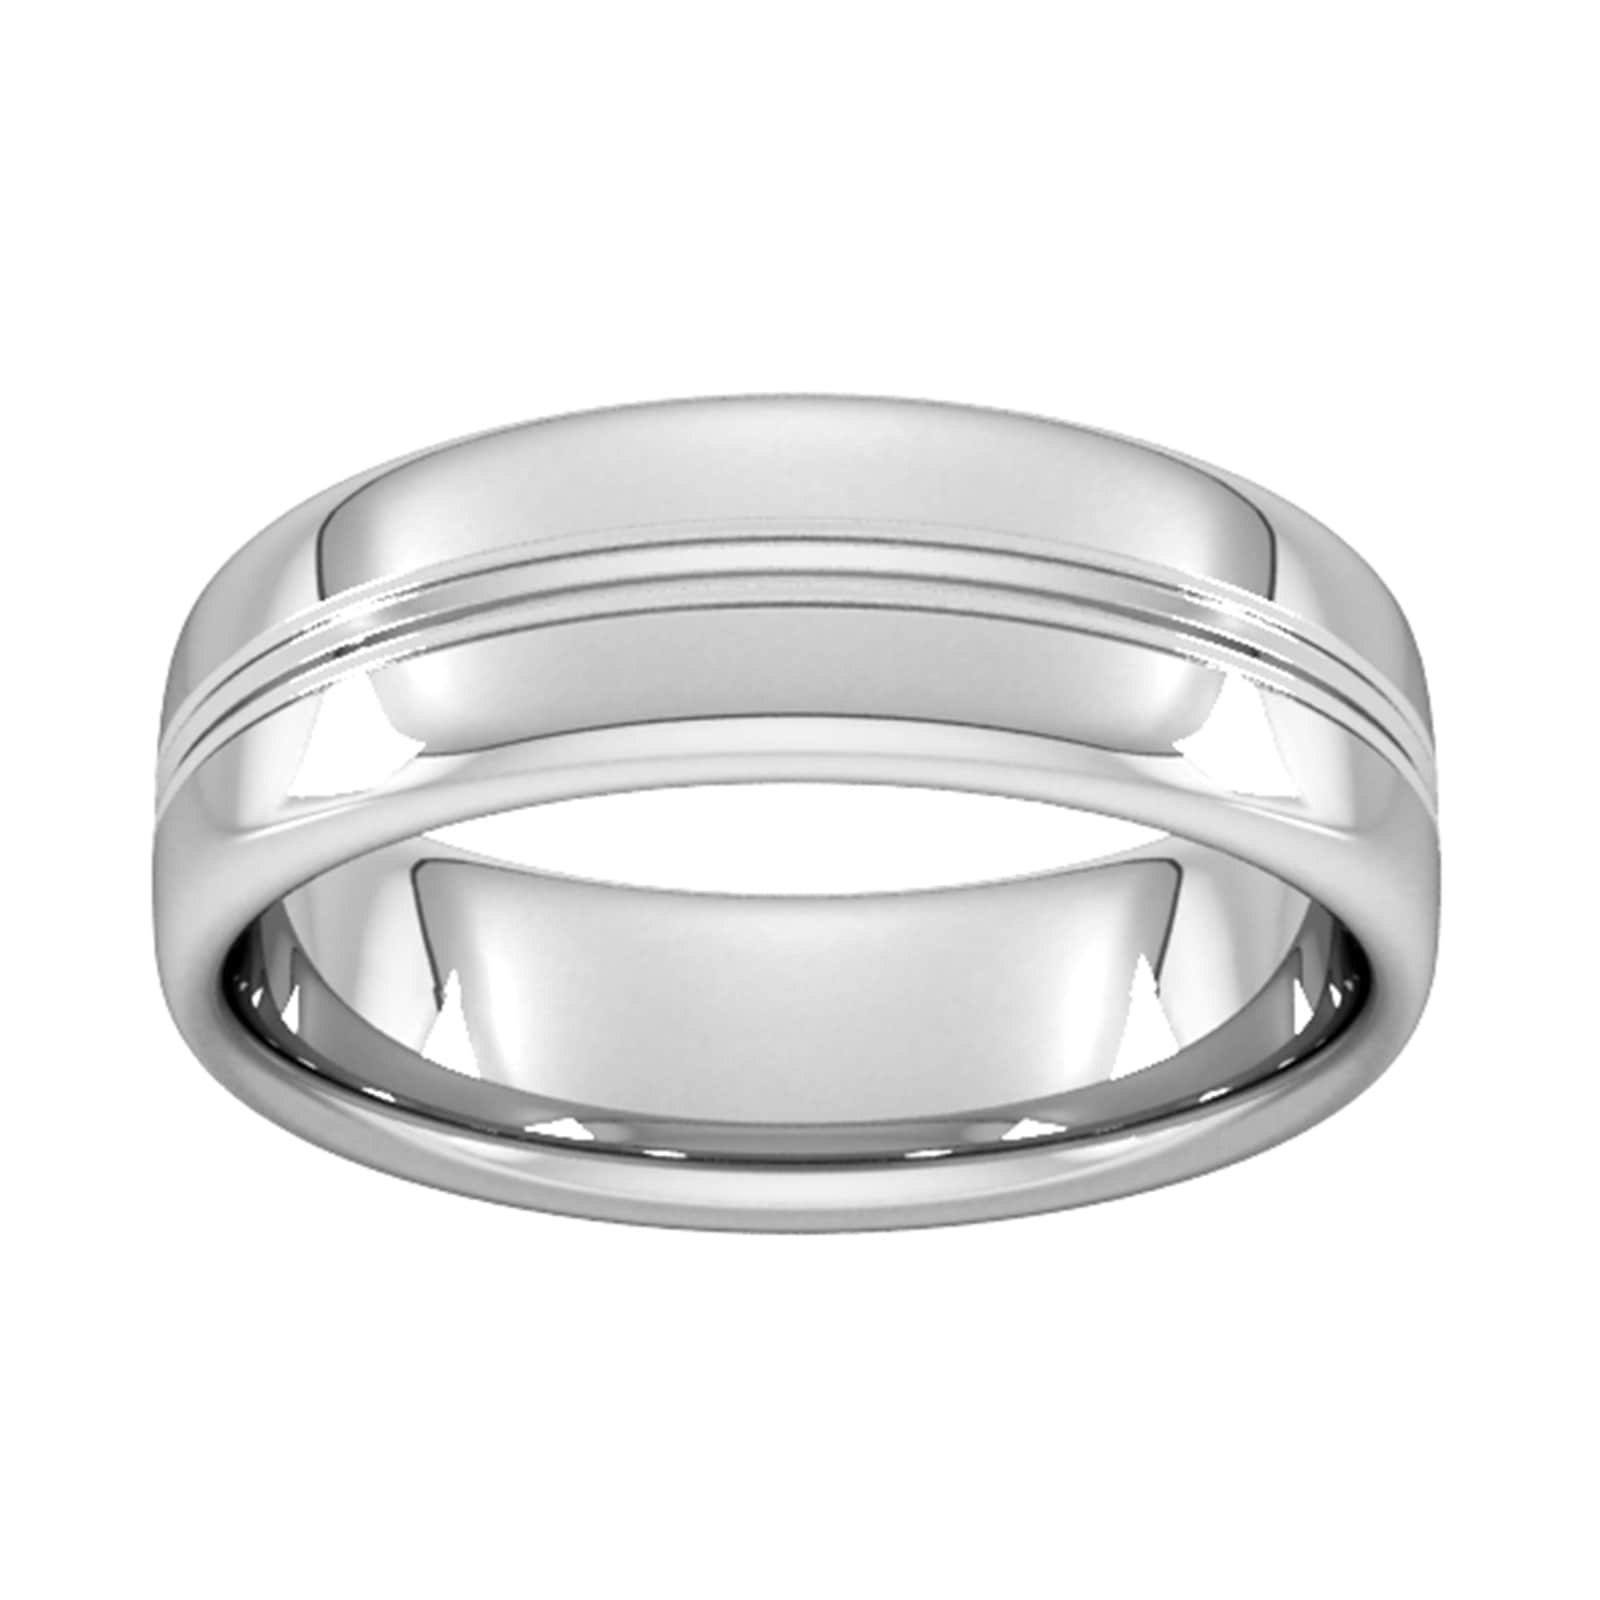 7mm Slight Court Heavy Grooved Polished Finish Wedding Ring In 9 Carat White Gold - Ring Size G